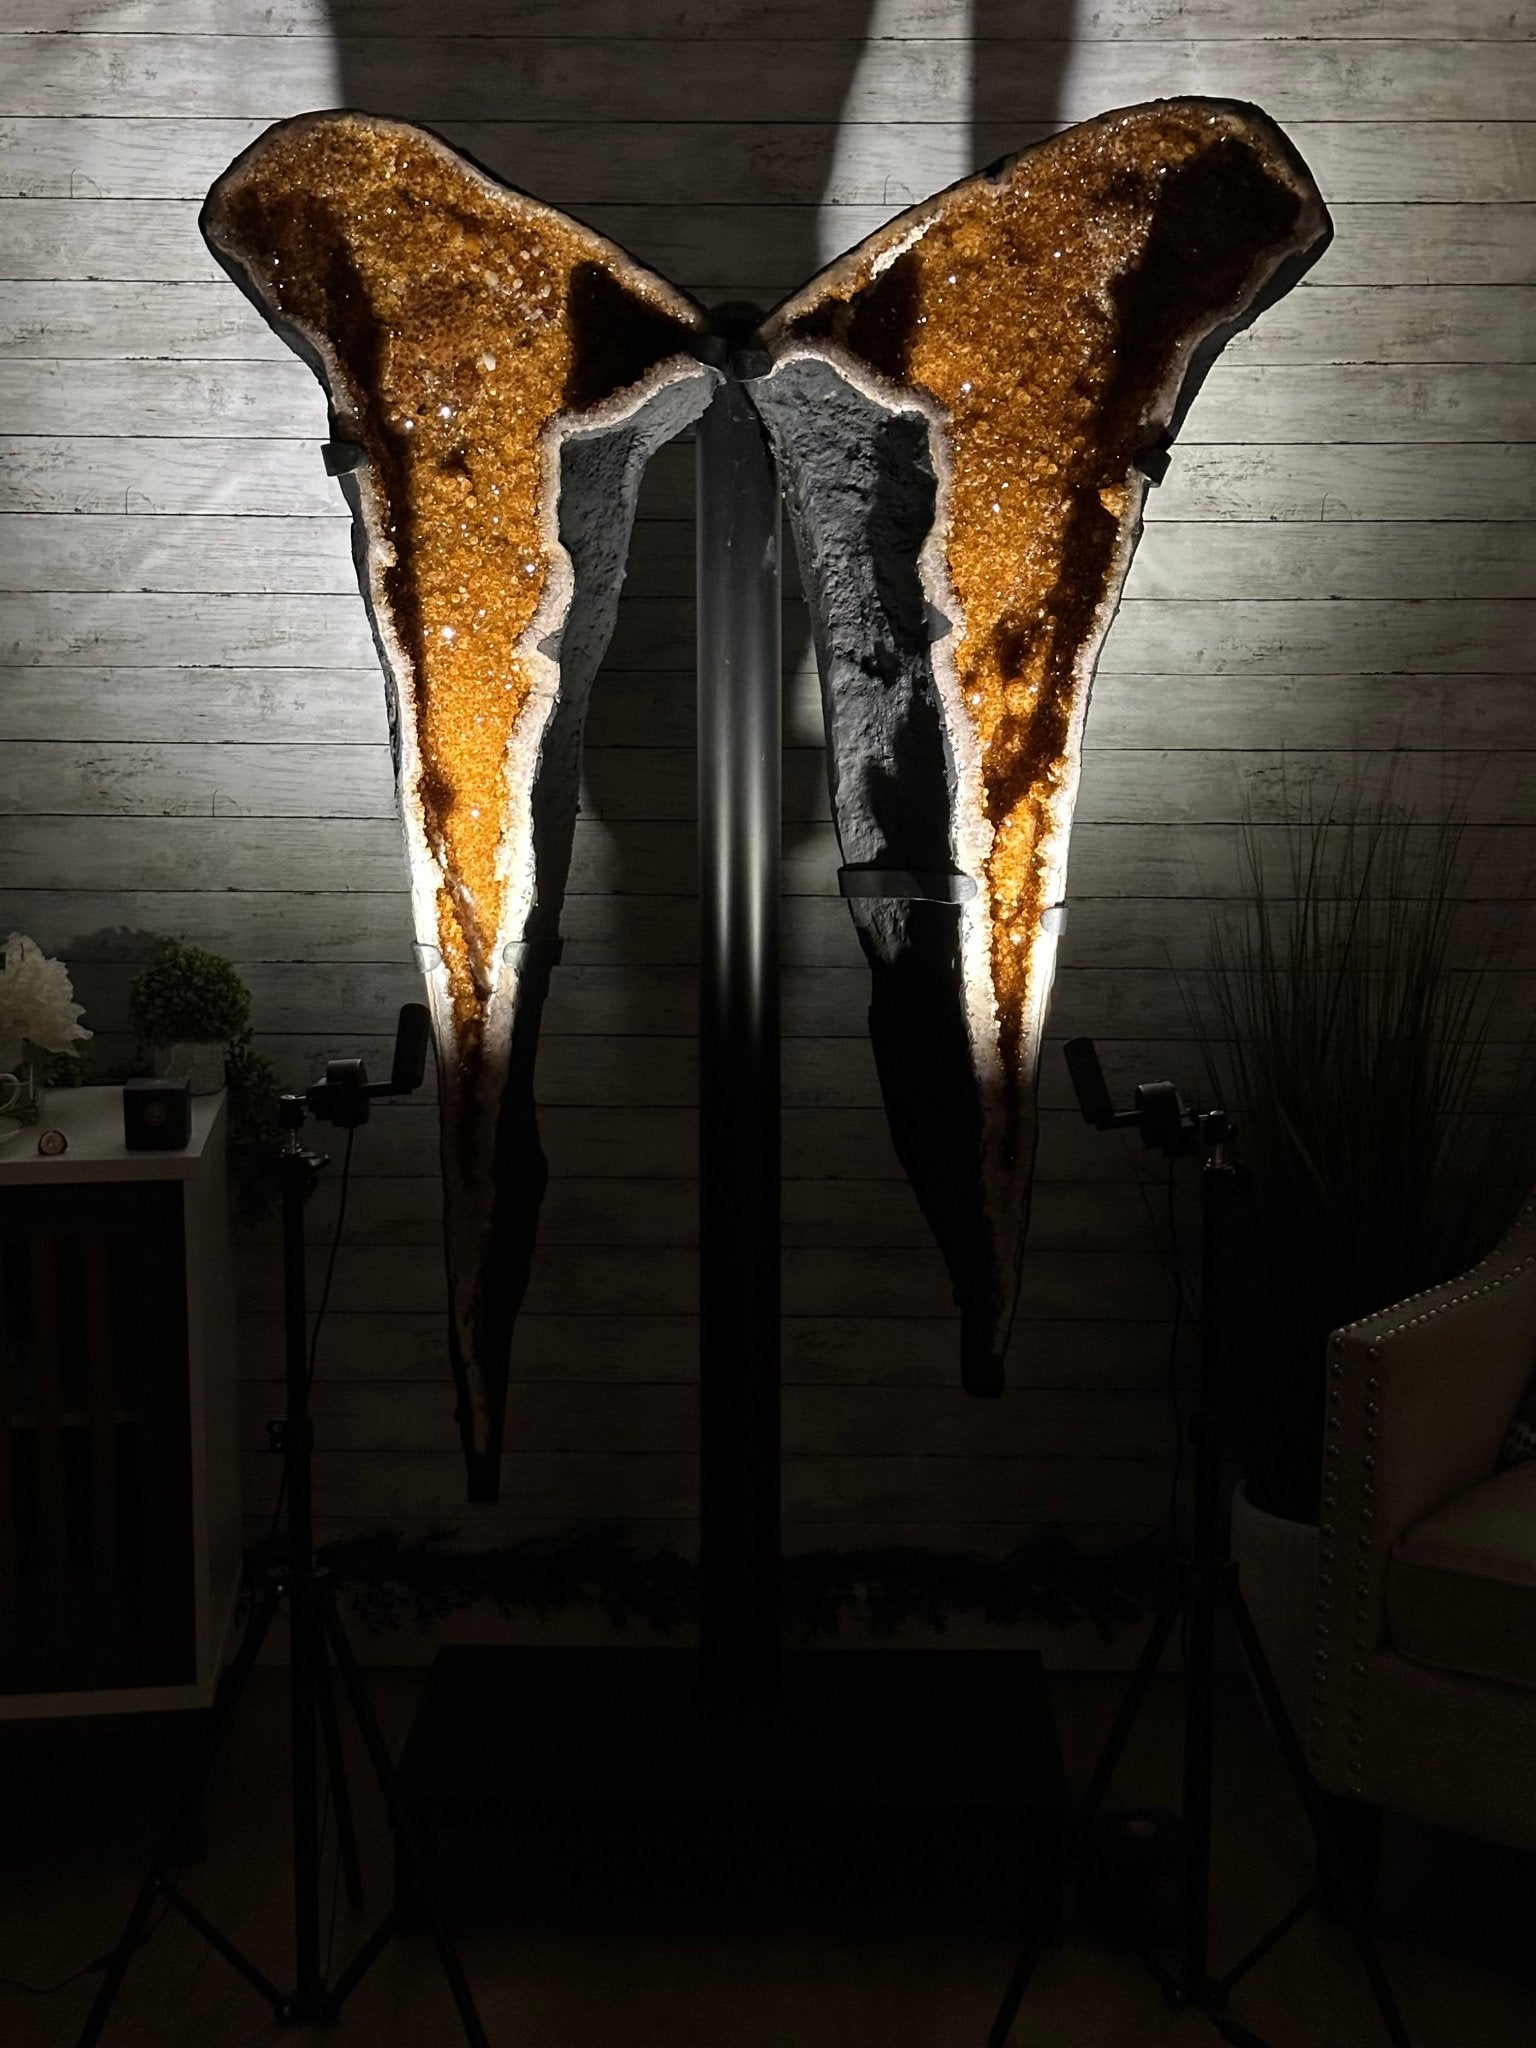 Large Citrine Butterfly Wings on a Metal Stand, 322 lbs & 72.75" Tall #5498-0005 - Brazil GemsBrazil GemsLarge Citrine Butterfly Wings on a Metal Stand, 322 lbs & 72.75" Tall #5498-0005Citrine Butterfly Wings5498-0005